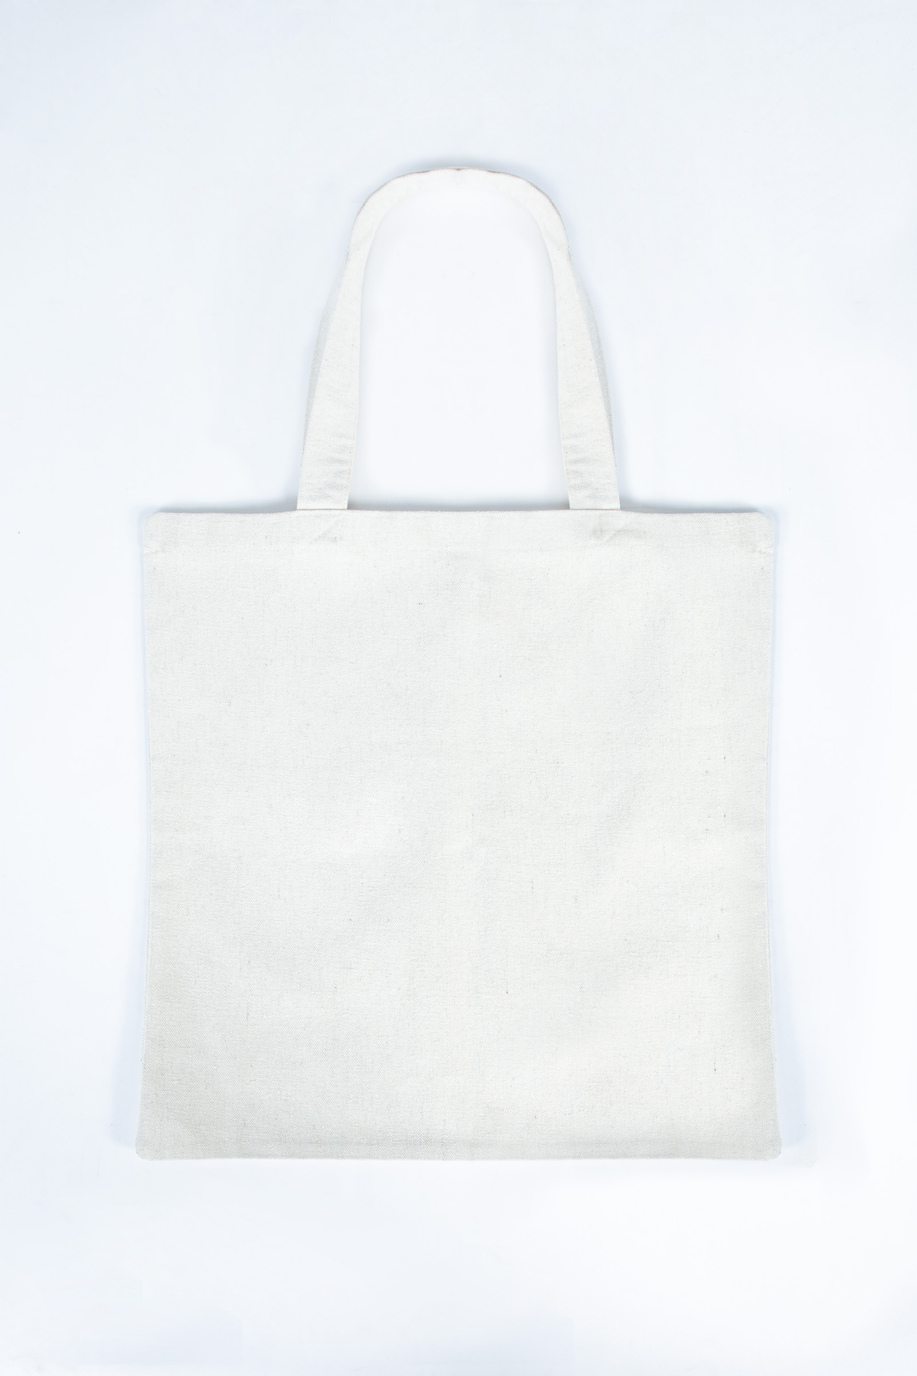 Unisex canvas tote bag with double handles - Gifts under €75 for her | La Martina - Official Online Shop